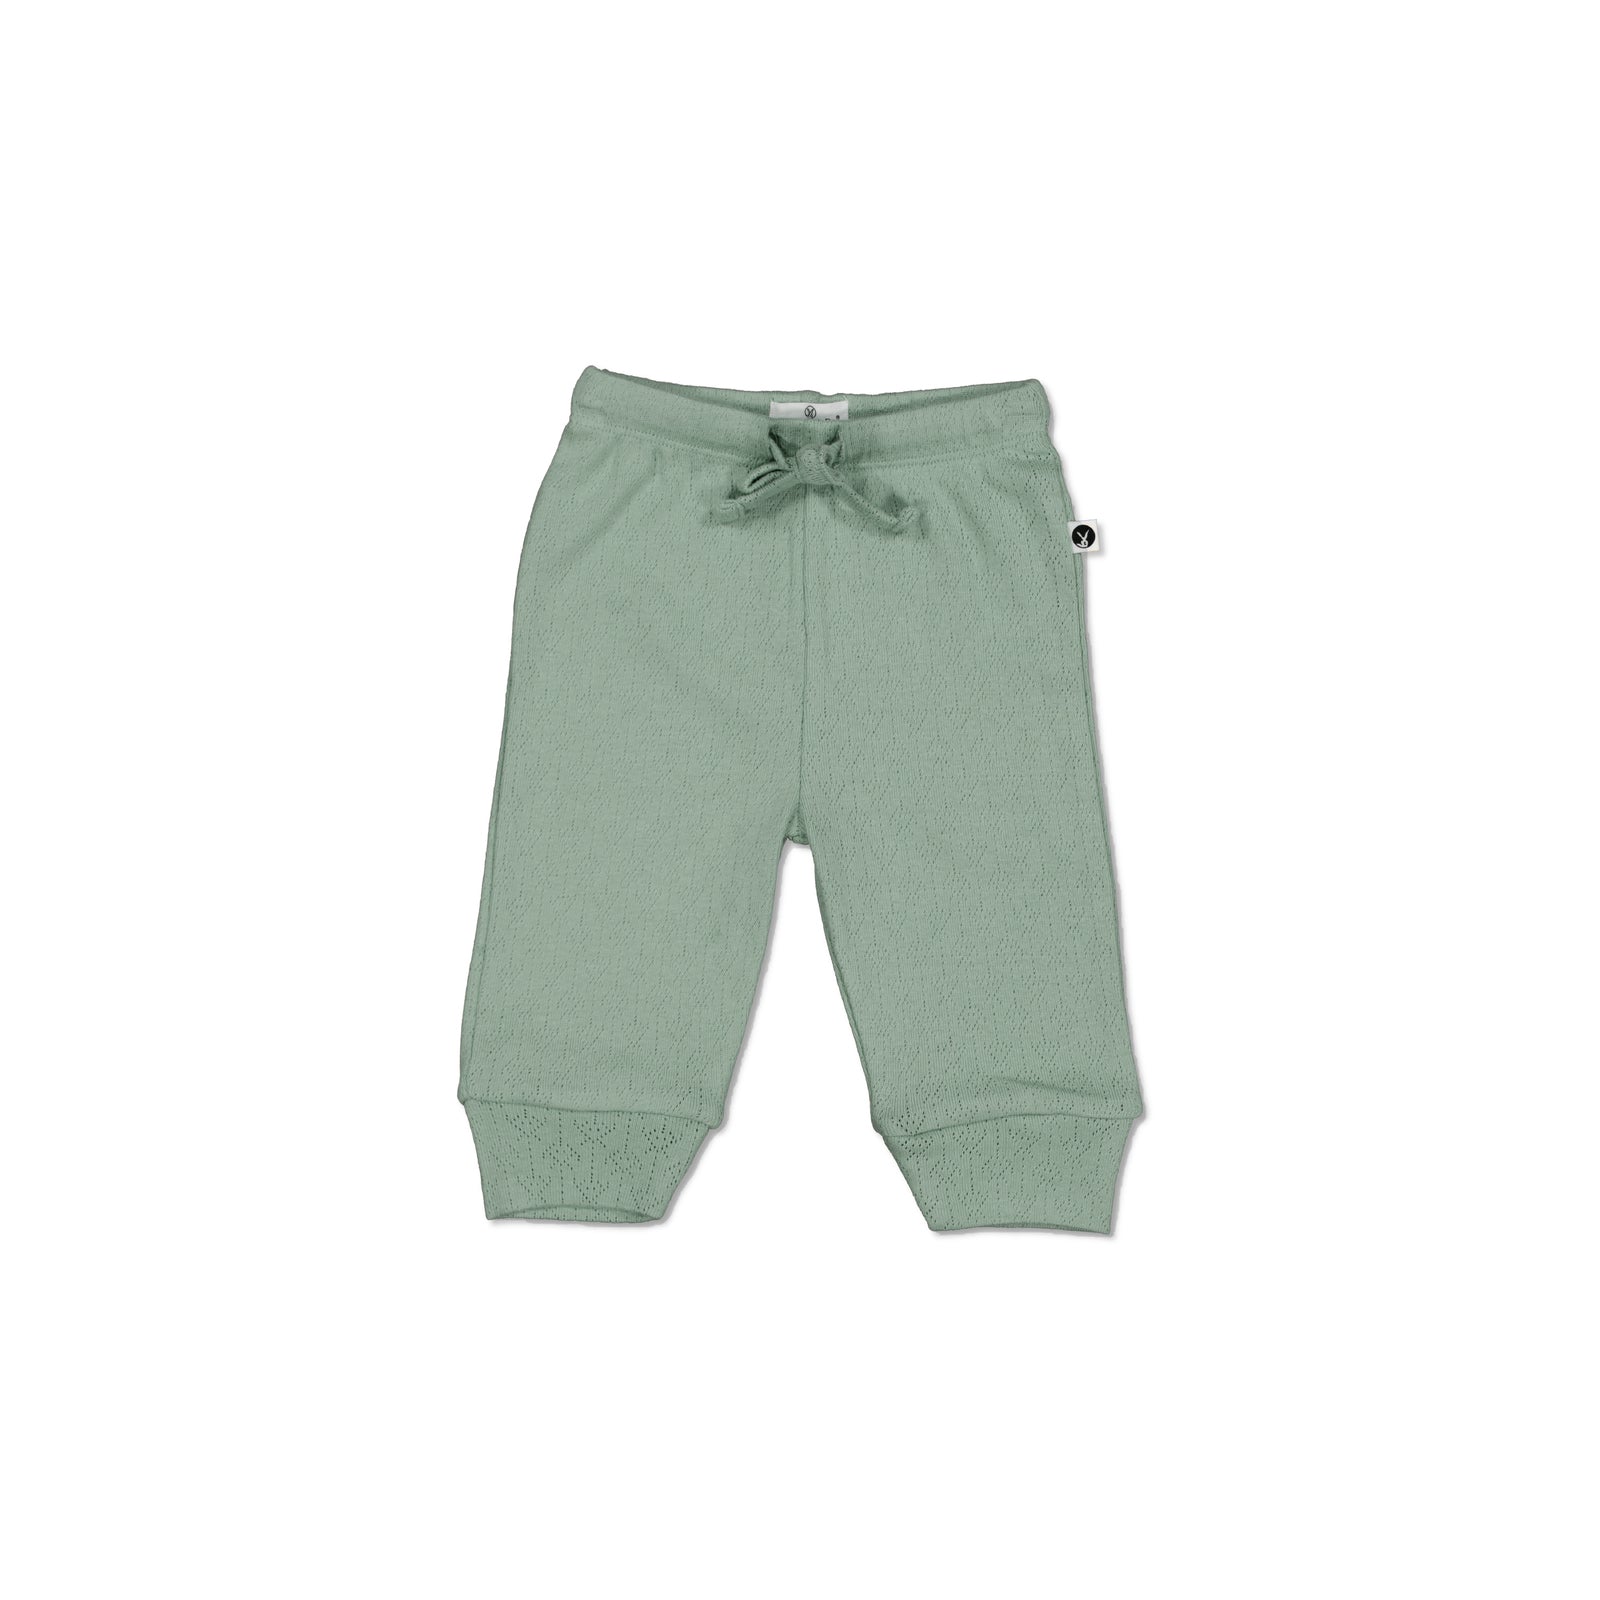 Burrow & Be Baby Boys Pant Pointelle Baby Pants - Riverstone